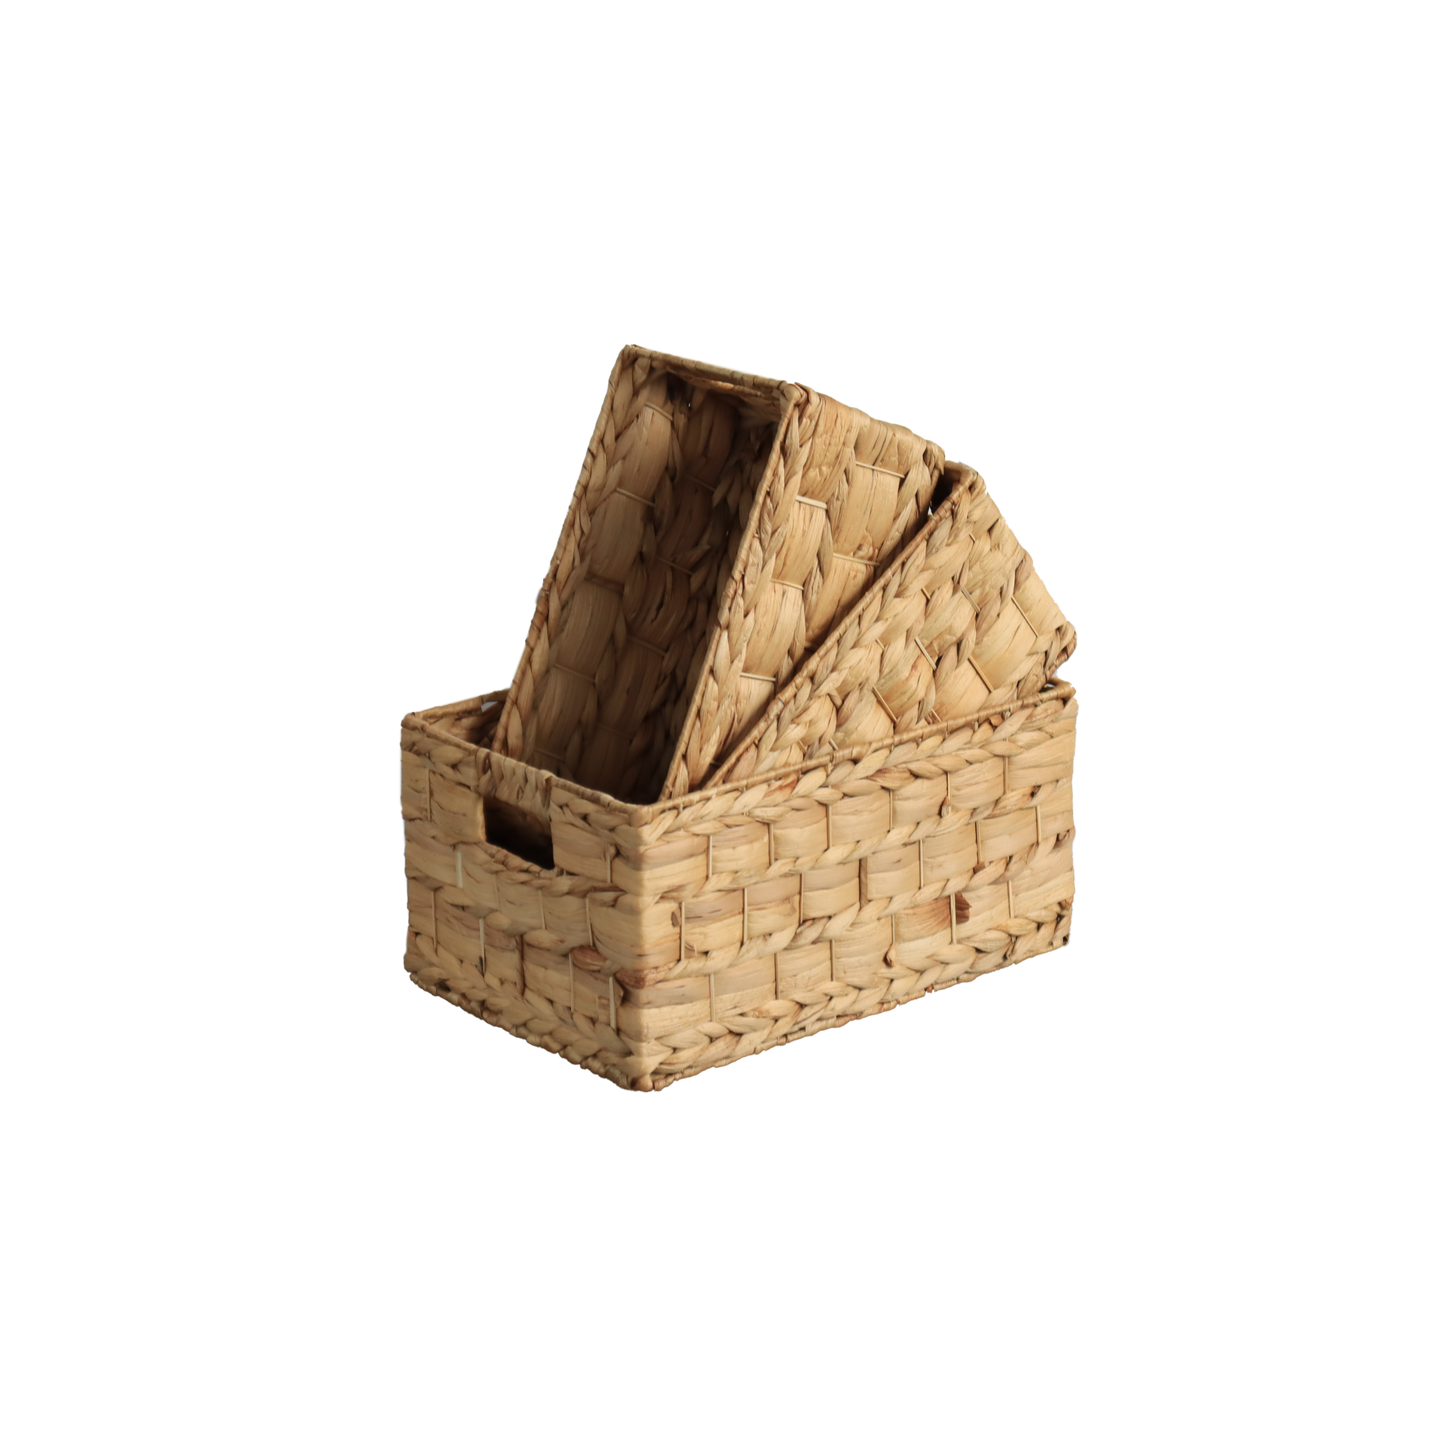 Eden Grace - Set of 3 Hand-Woven Wicker Baskets  - Water Hyacinth, Nesting Sizes for Smart Storage, Eco-Friendly Home Decor with Rice Nut - Flat Weave